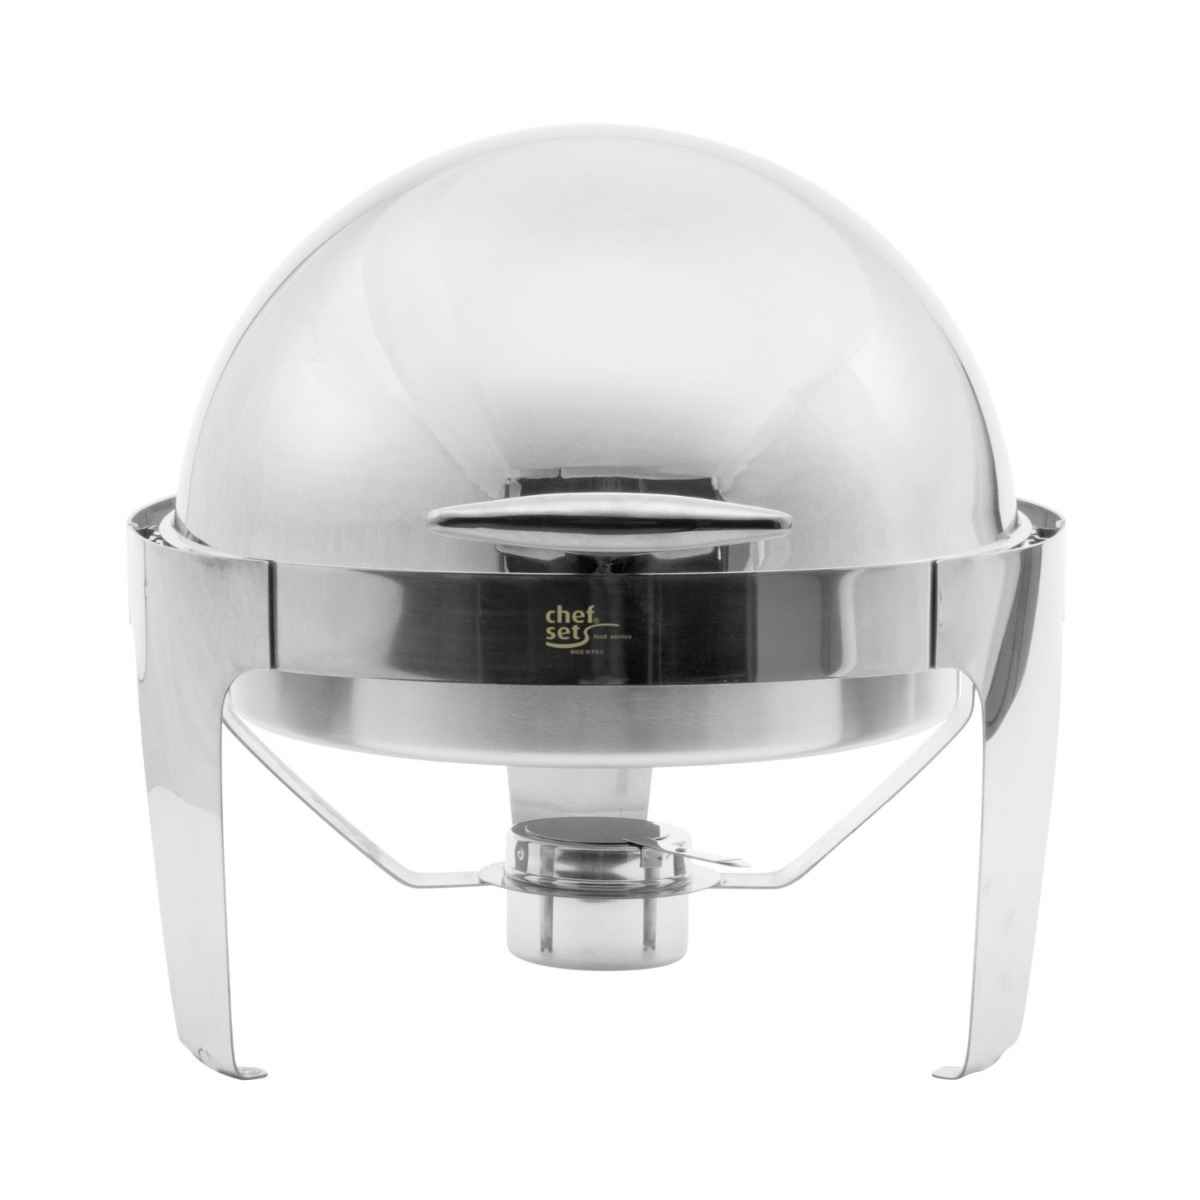 Chefset Round Chafing Dish Roll Top